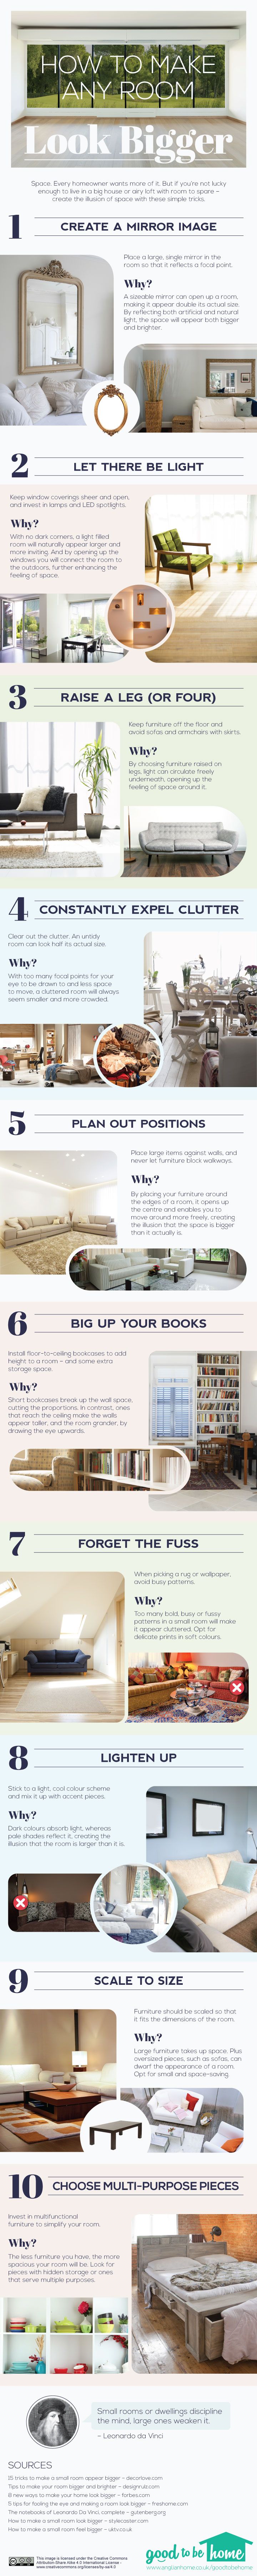 How to Make Any Room Look Bigger #infographic #HowTo #HomeImprovement